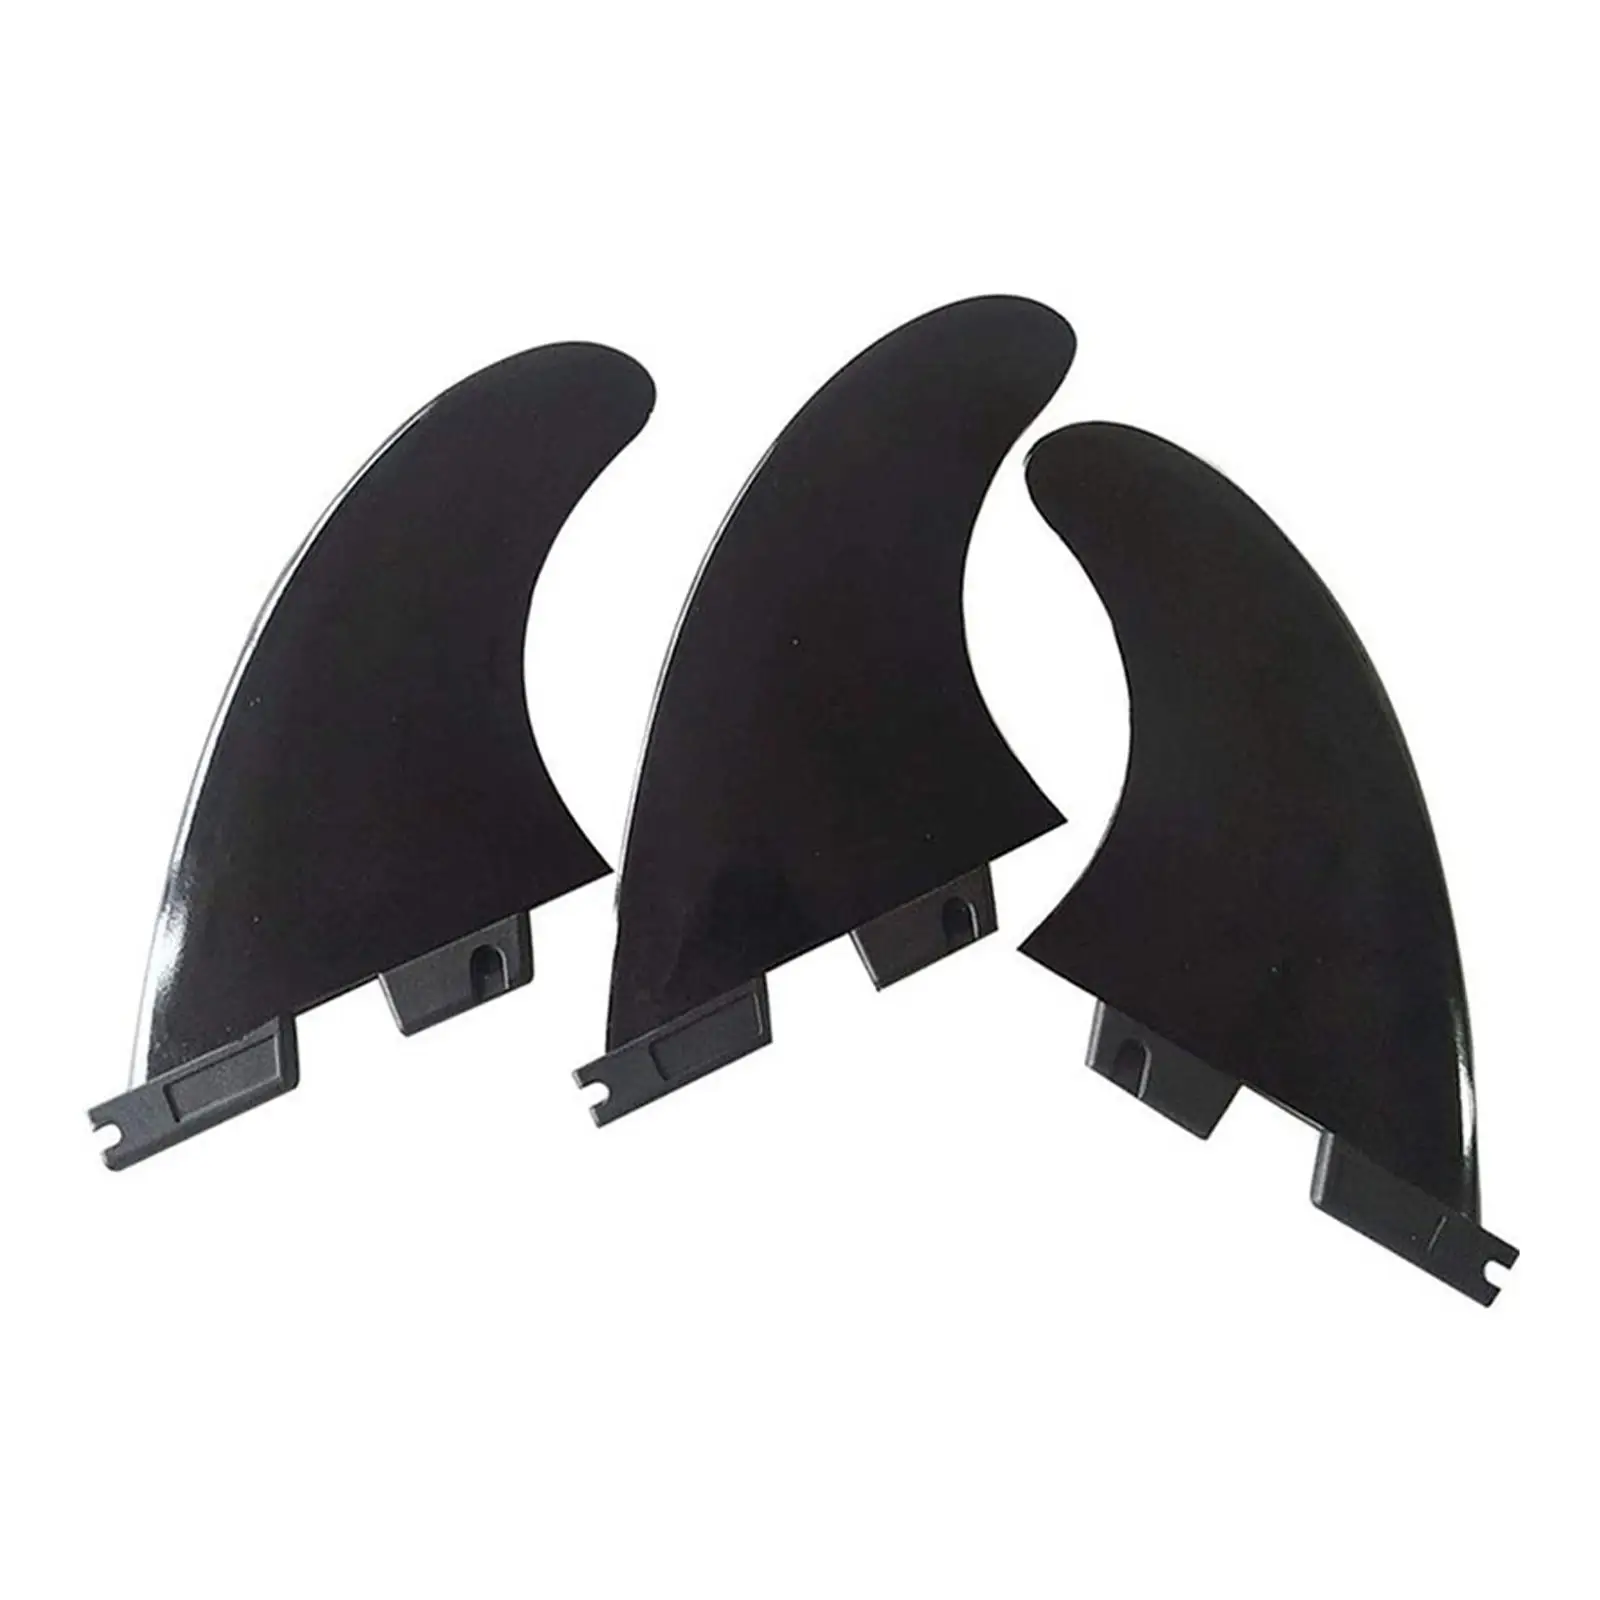 3x Surfboard Fin Surf Fin Paddle Board Fin Longboard Center Fin for Surfing Boards Longboard Stand up Paddleboard Dinghy Repair